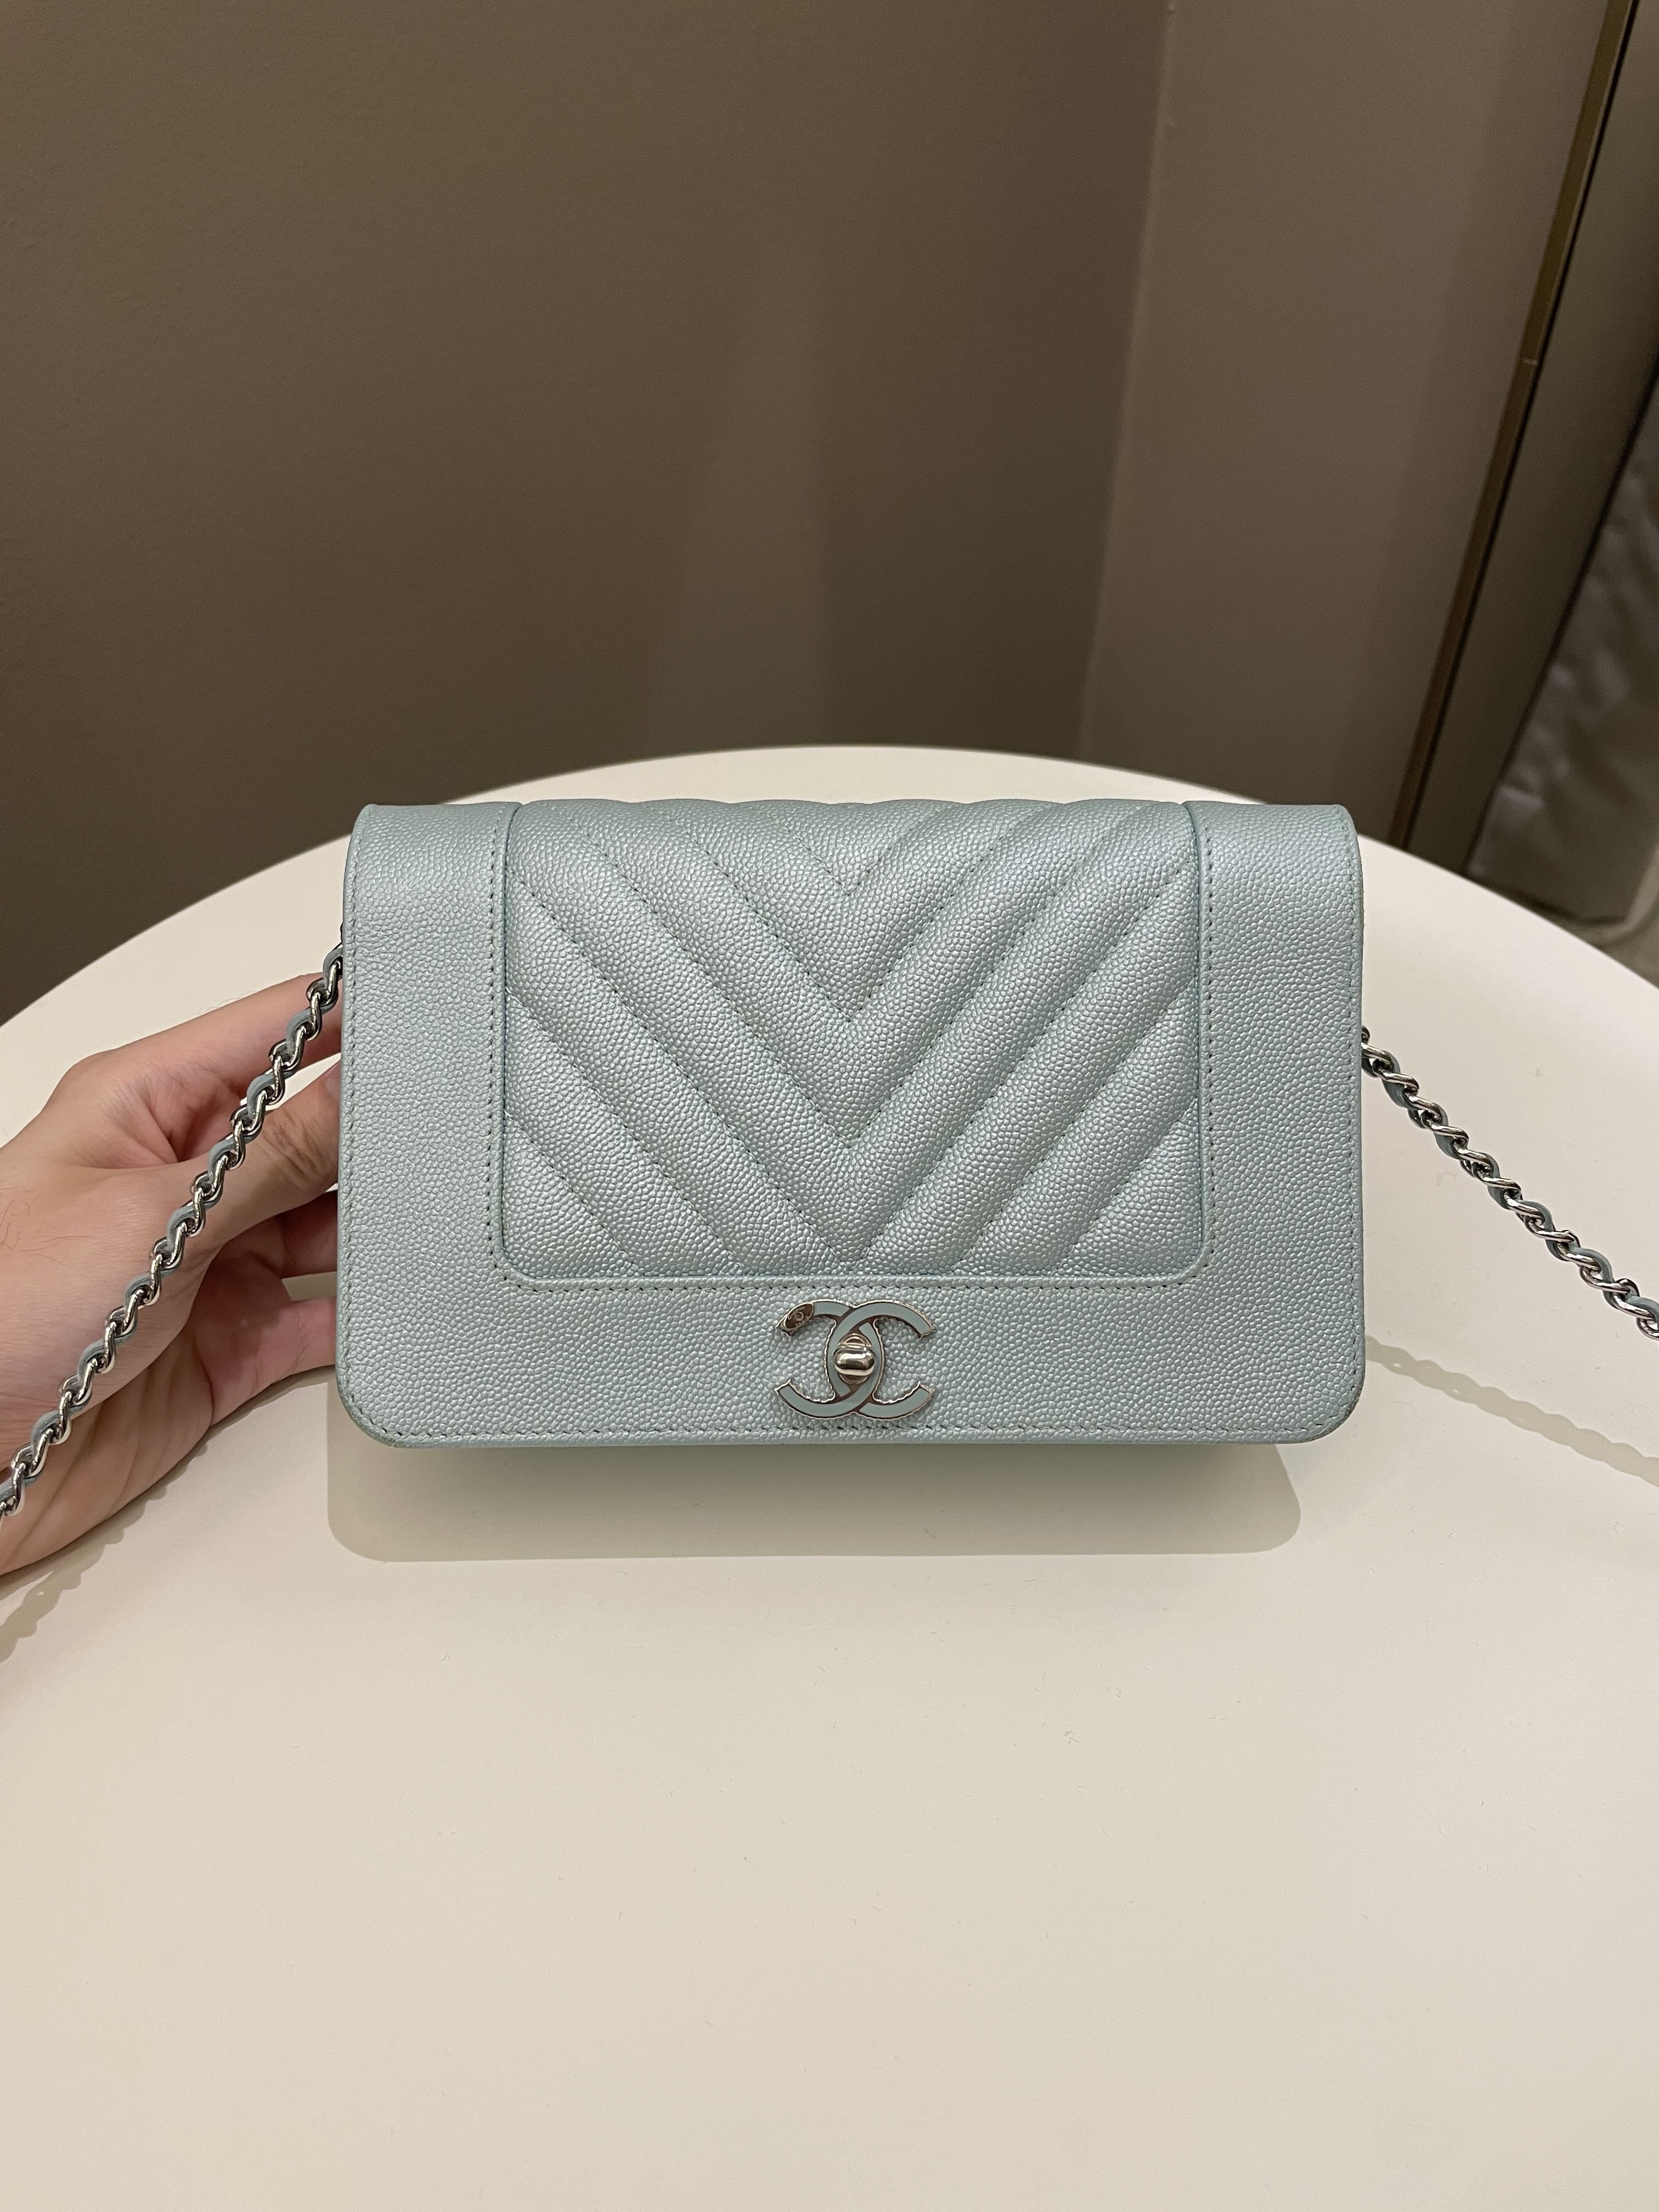 Chanel Mademoiselle Wallet On Chain Blue Iridescent Caviar